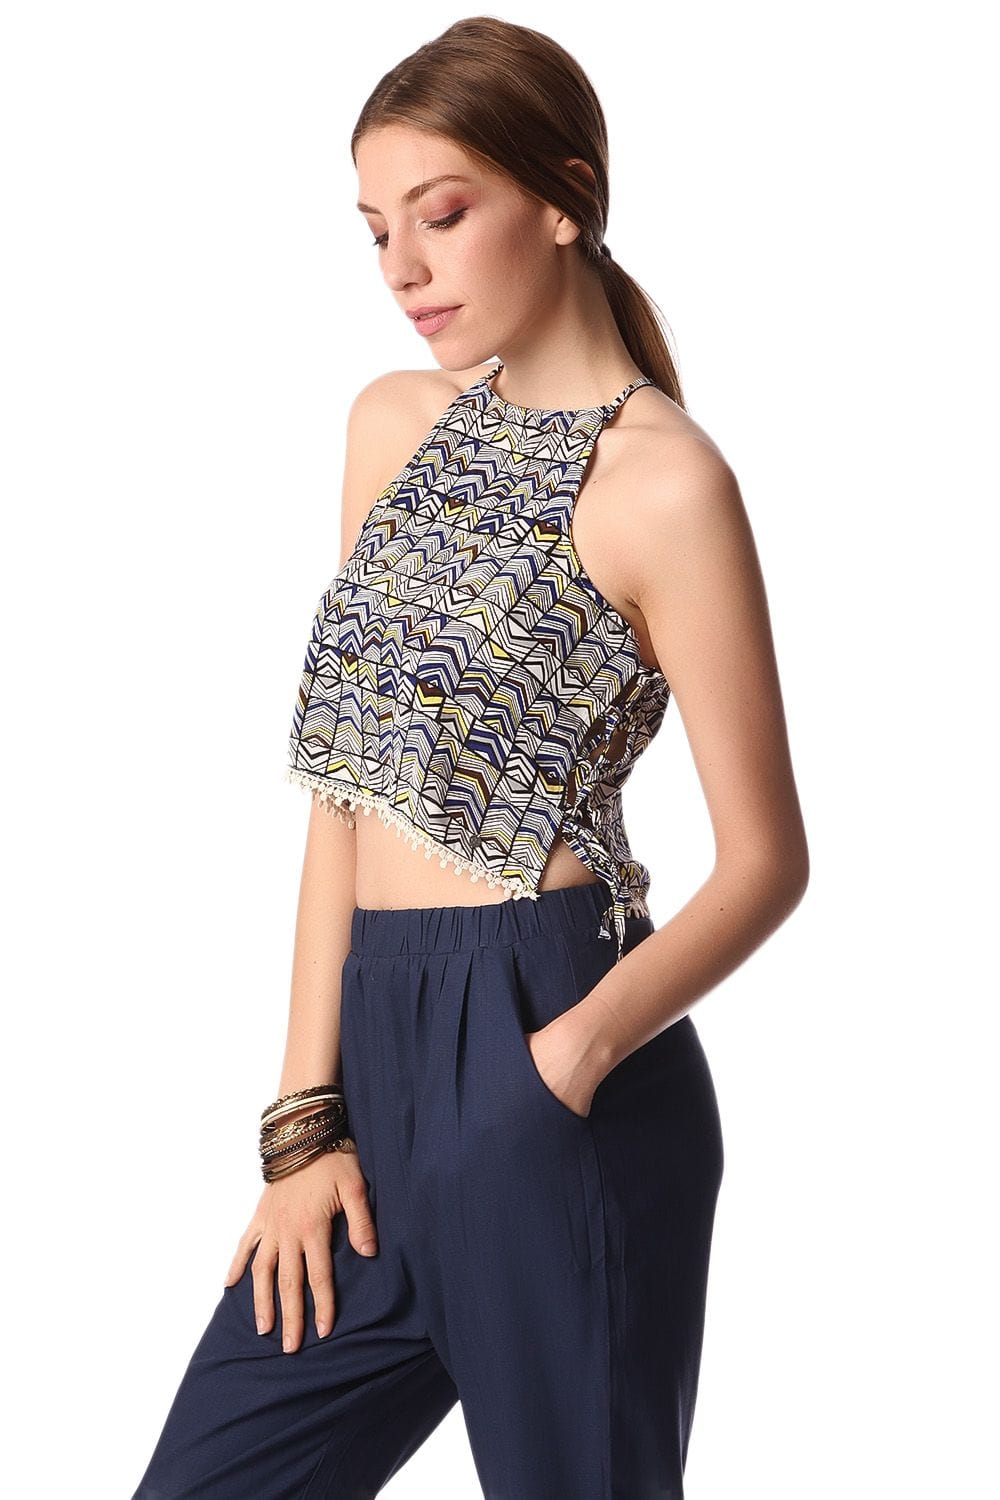 Q2 Shirts Blue printed crop top with lace up side detail